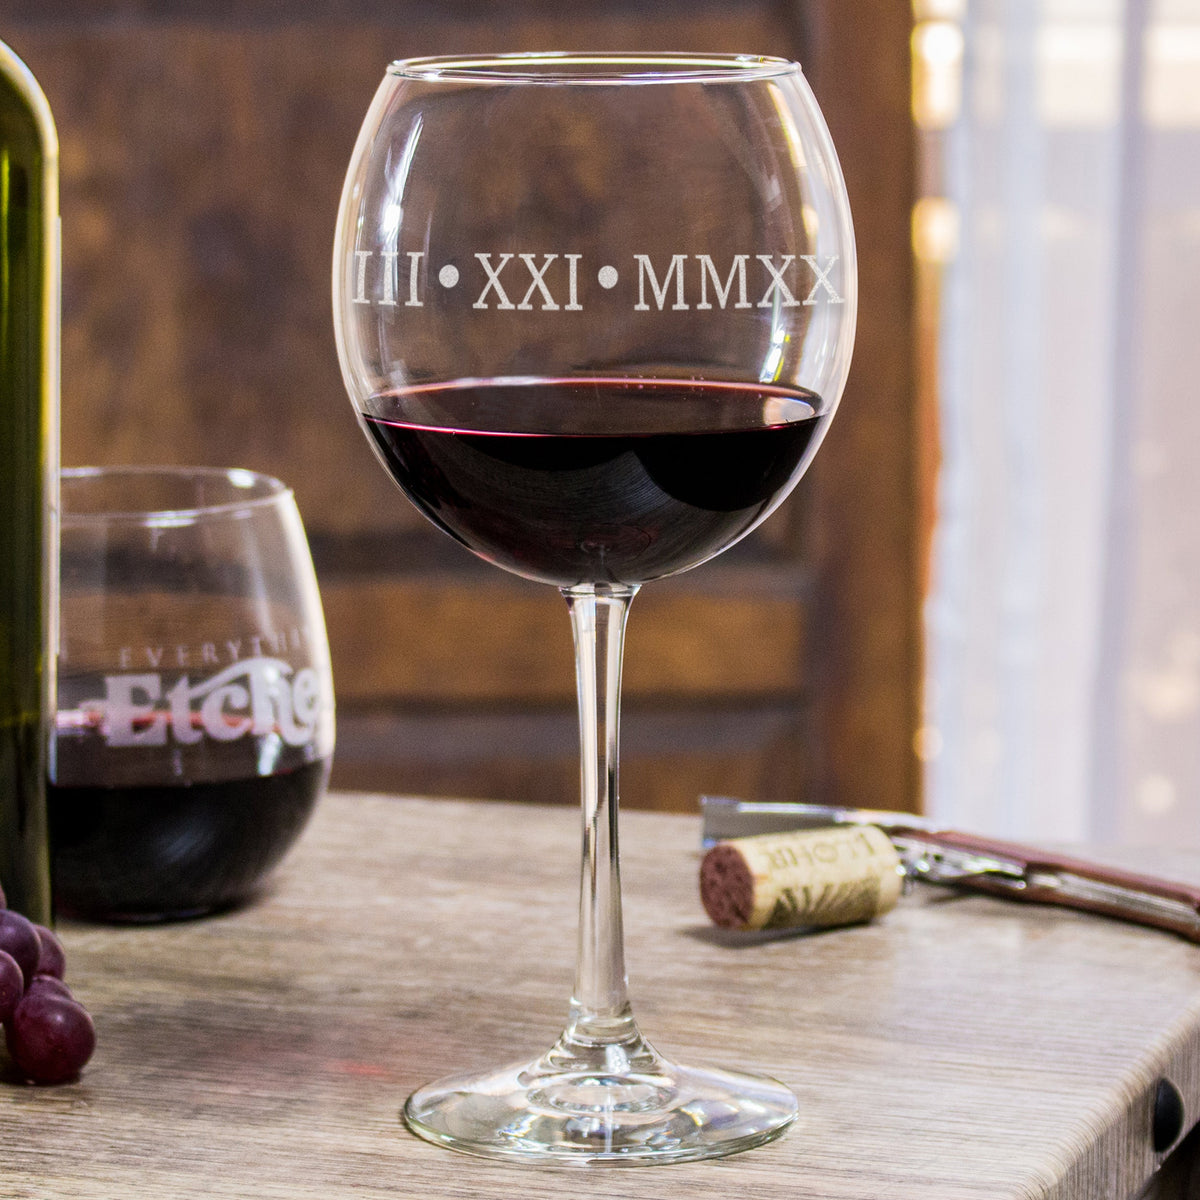 Personalized Roman Numeral Red Wine Glasses, Design: NUMERALS - Everything  Etched